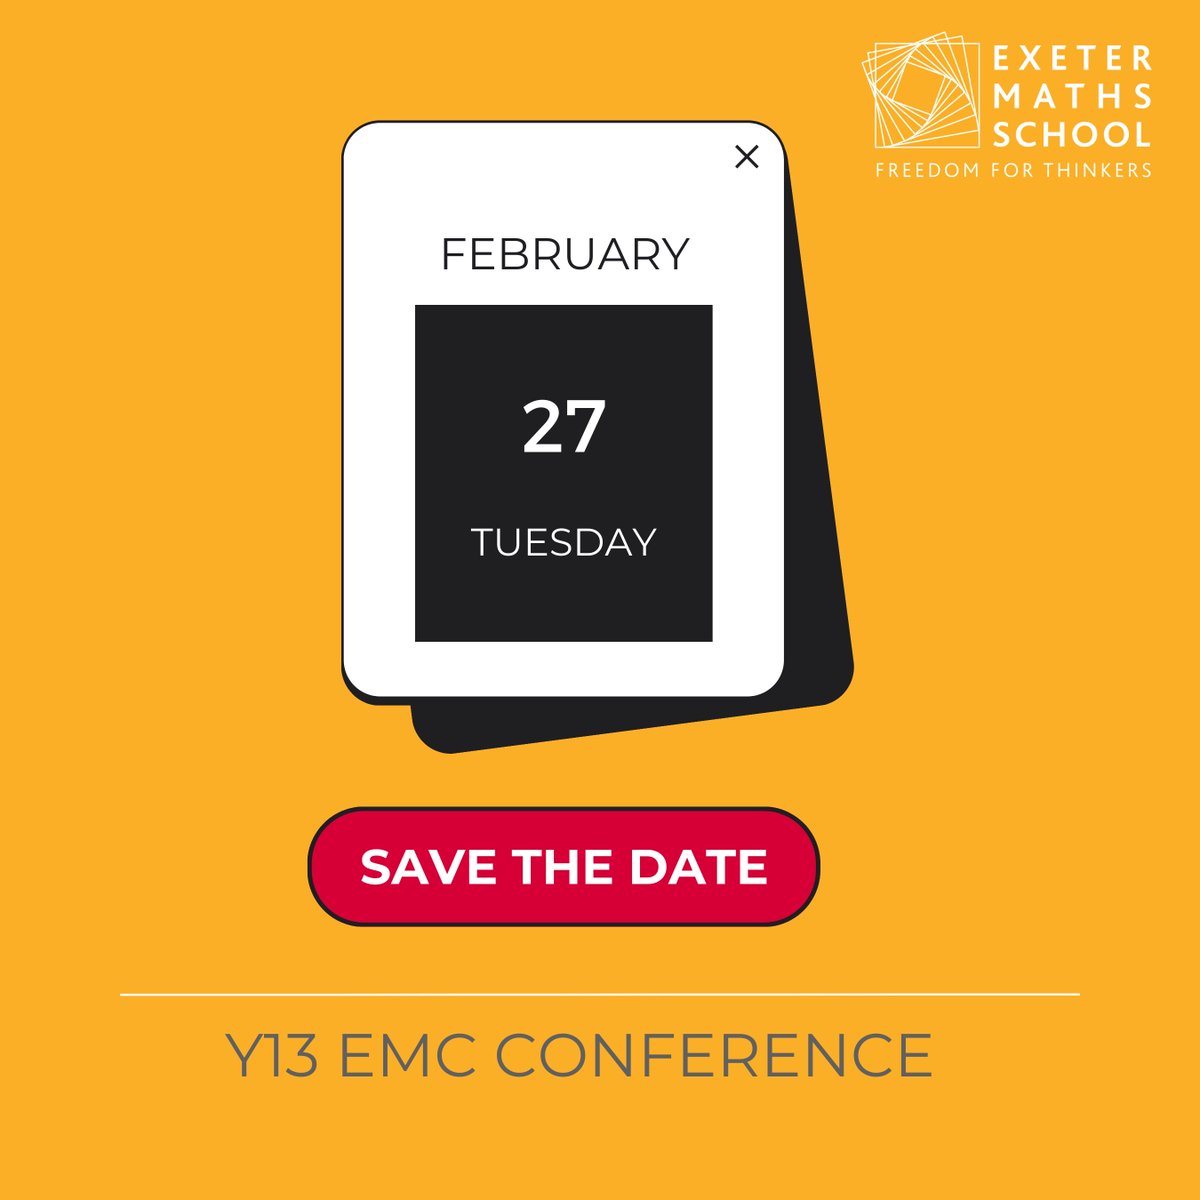 Parents & Carers - Don't forget our Y13 EMC Conference is due to take place on Tuesday 27 February. Further details and booking information will be sent out soon. We're looking forward to welcoming you!